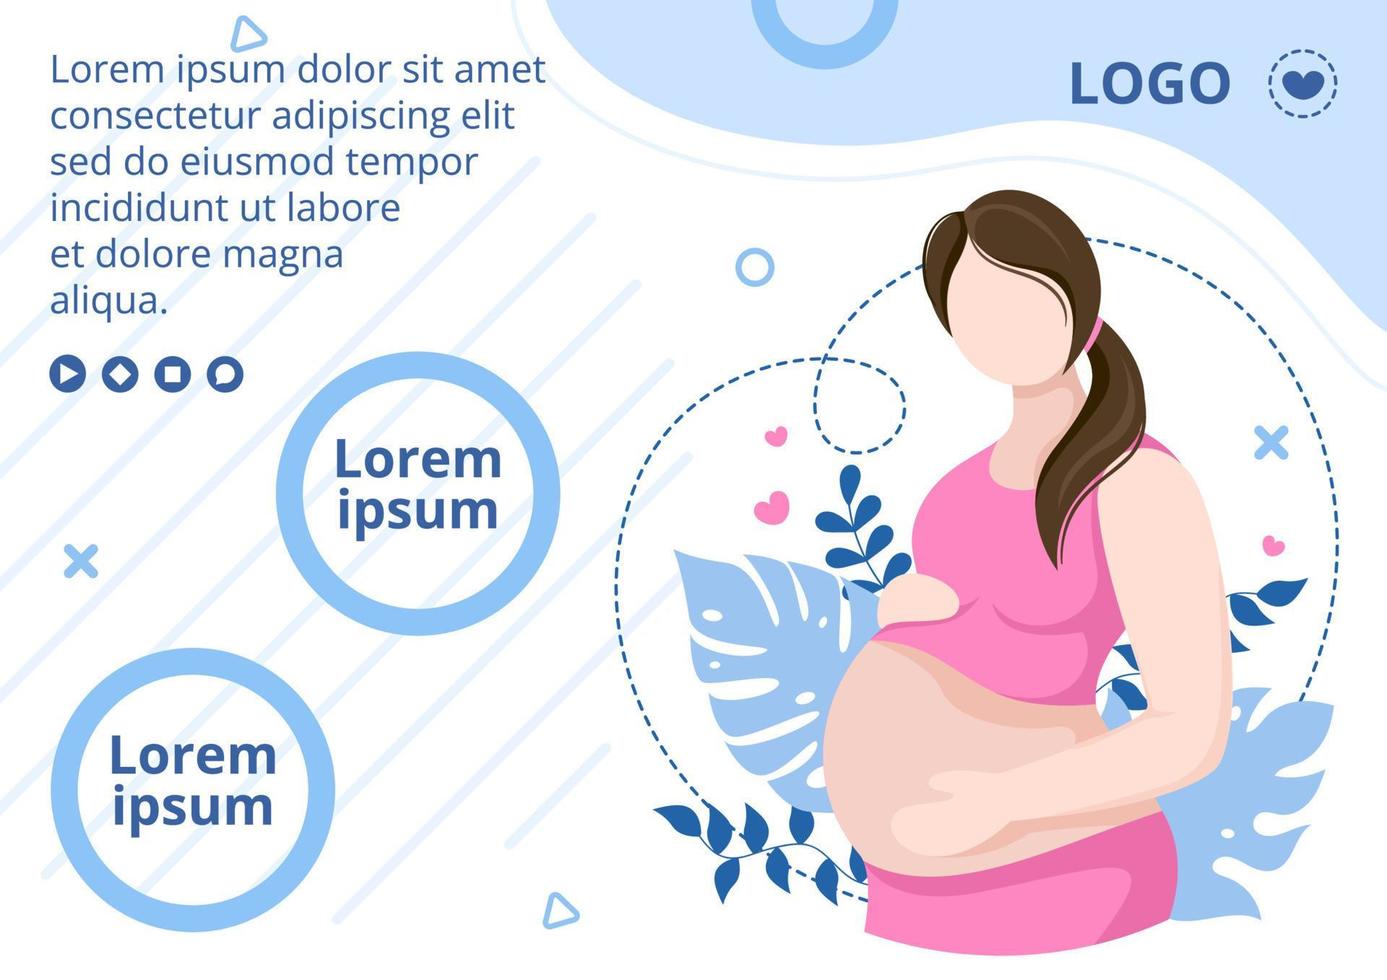 Pregnant Lady or Mother Brochure Health care Template Flat Design Illustration Editable of Square Background for Social media or Greetings Card vector